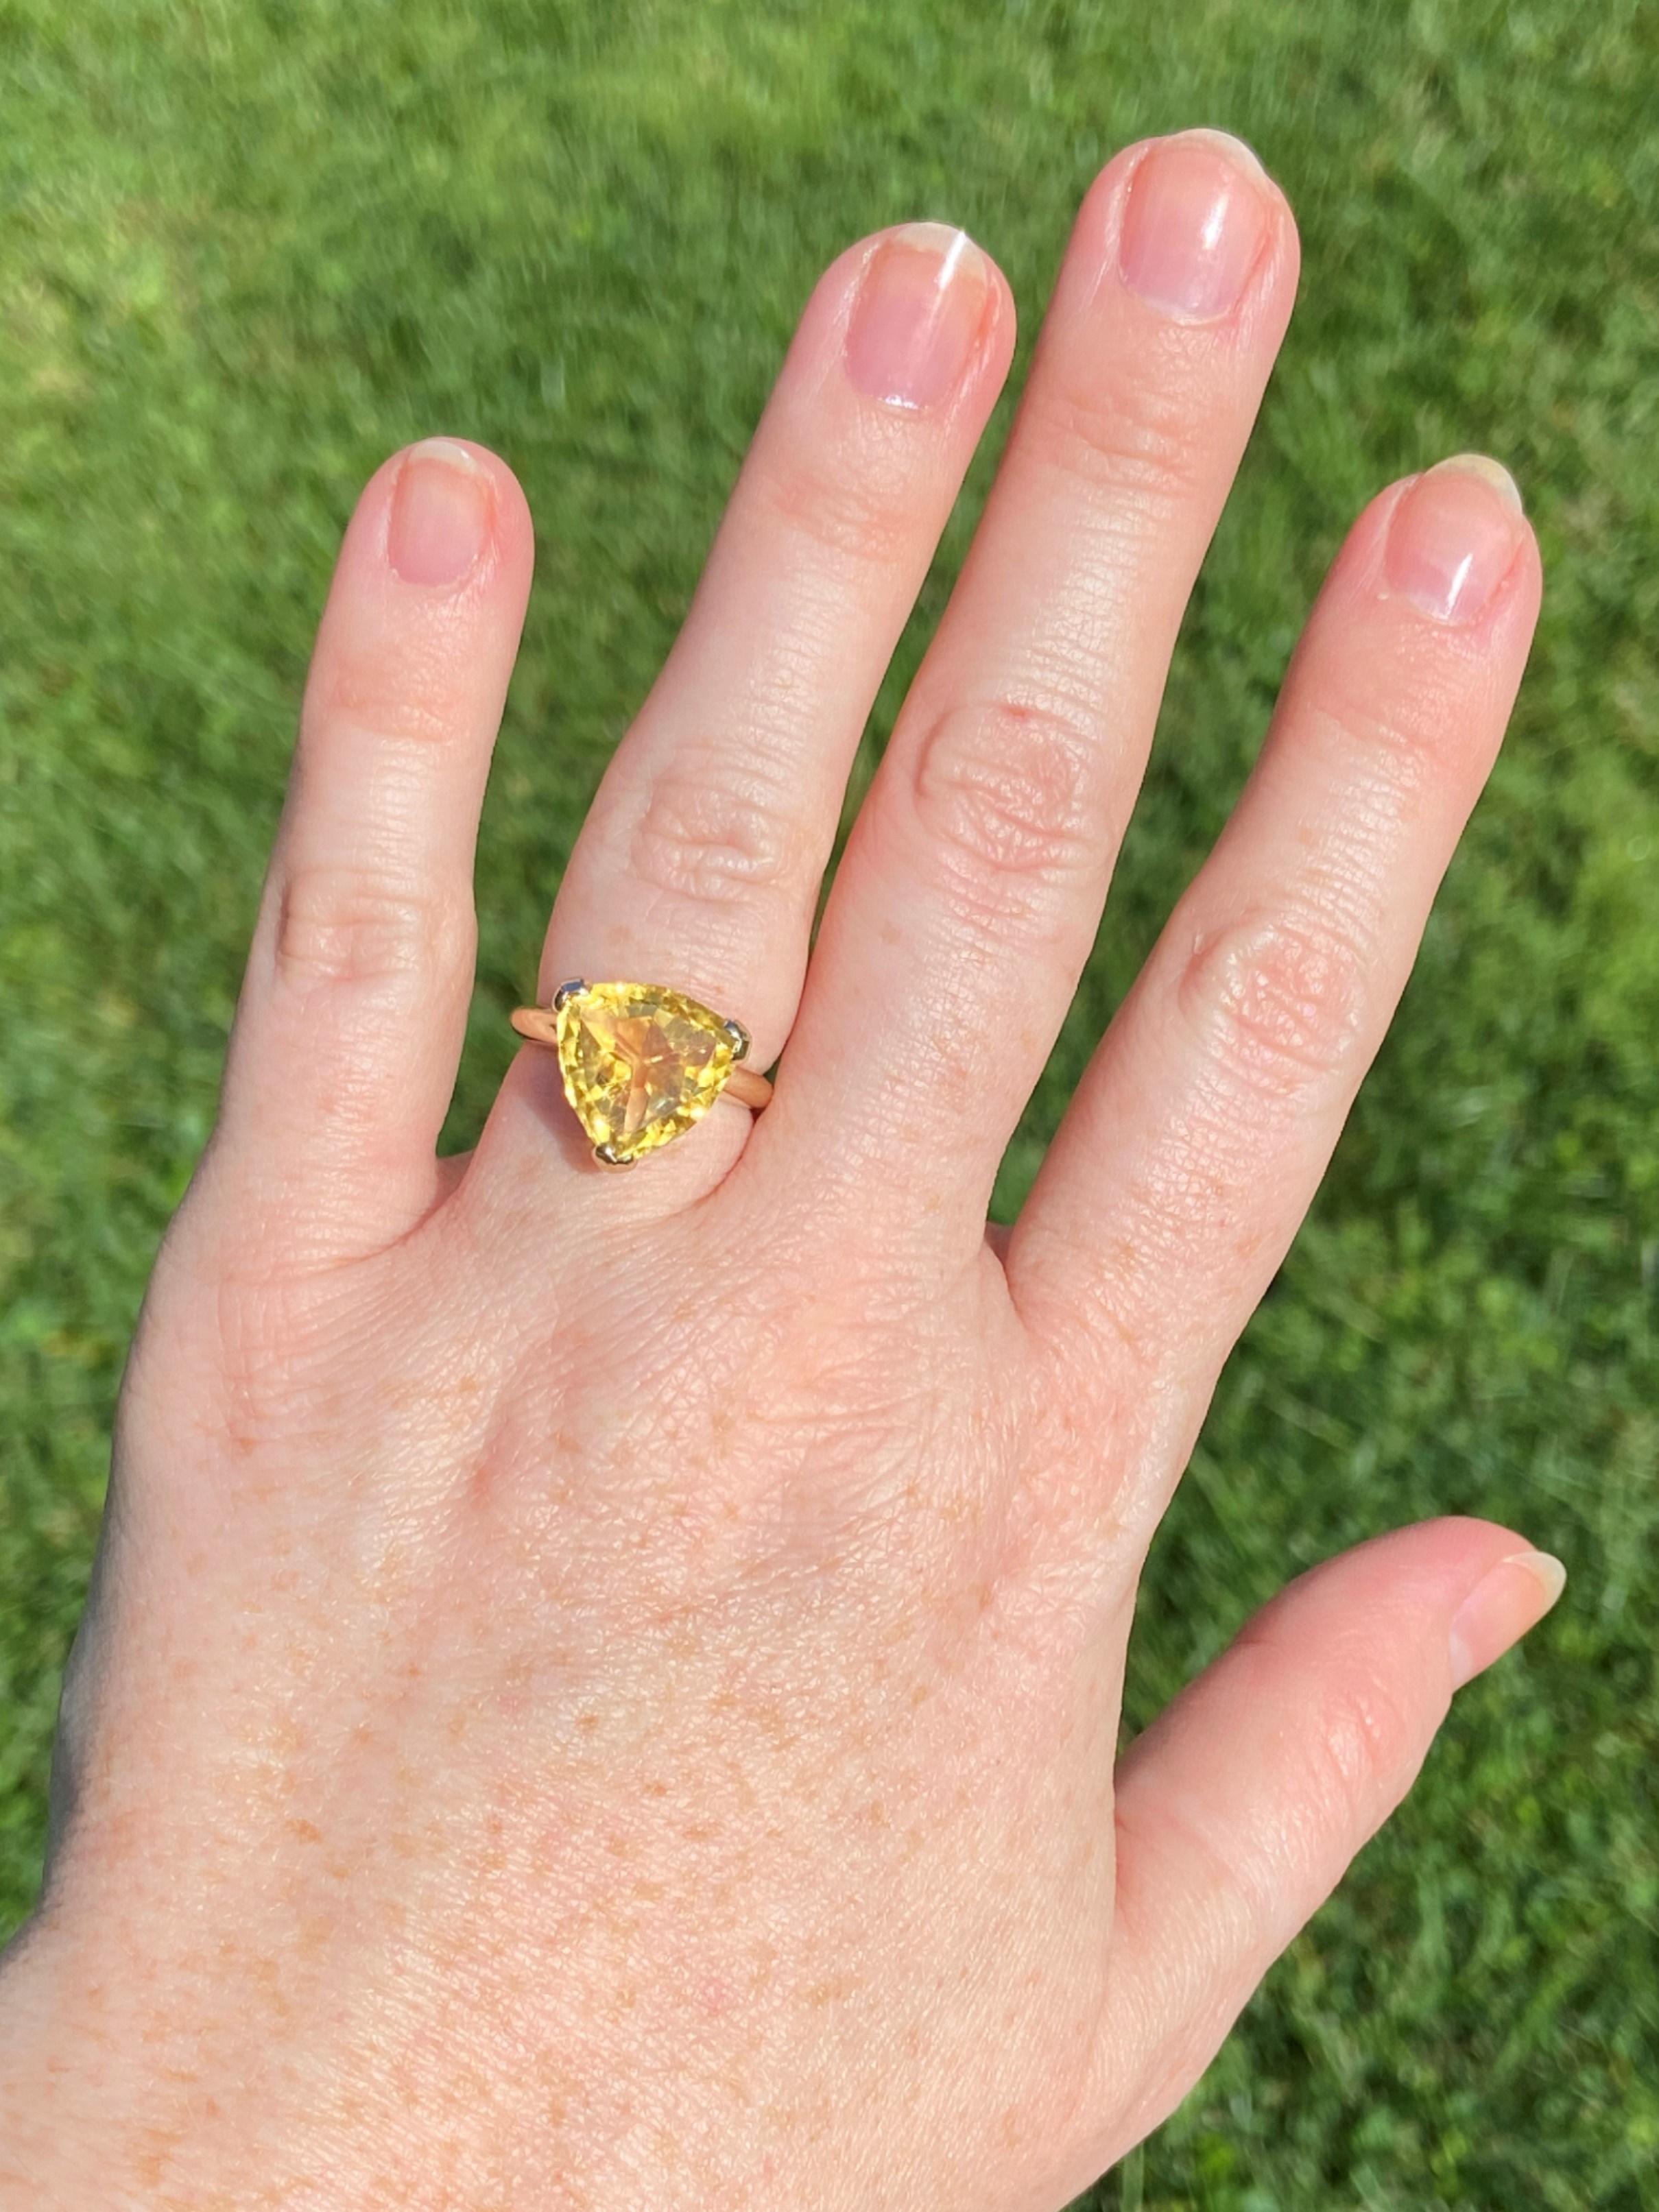 A large sundrop of a 5.45ct citrine sits at the center of this ring, and it is in a trillion cut, which is one we don't see very often. The setting is simple, which allows the stone and the cut to be showcased. 

The head of the ring measures 9/16